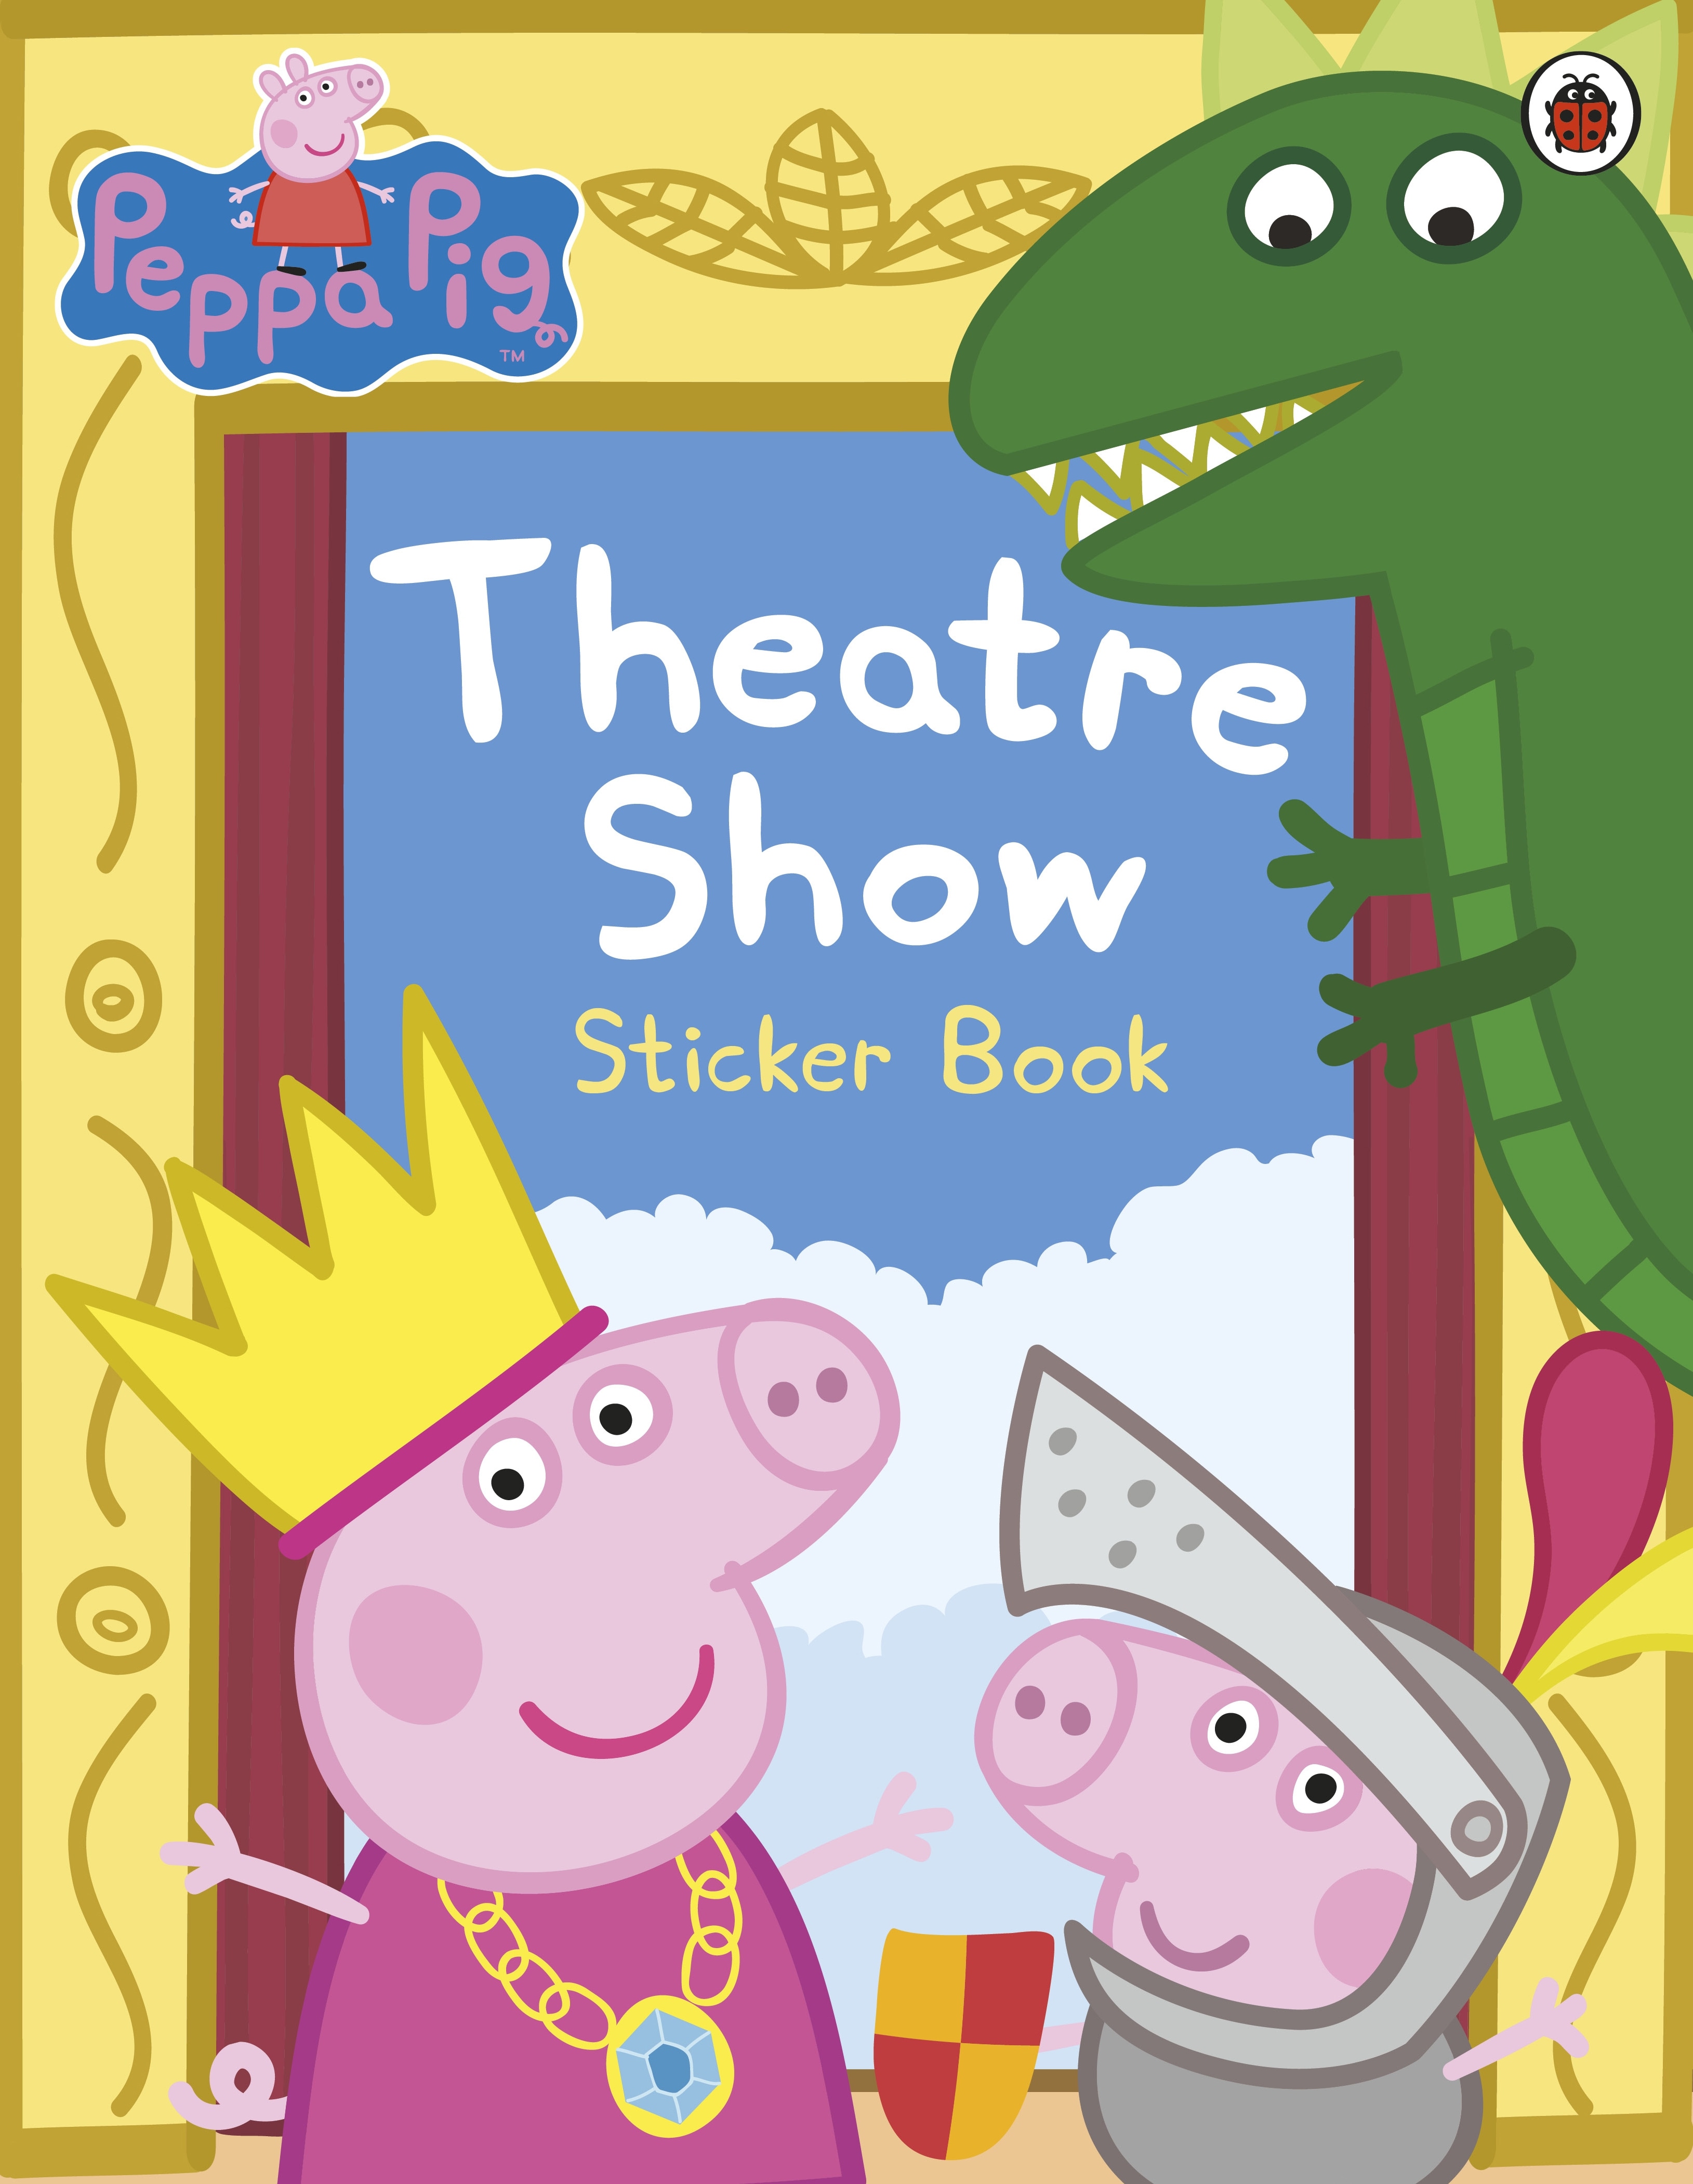 Book “Peppa Pig: Theatre Show Sticker Book” by Peppa Pig — January 3, 2013